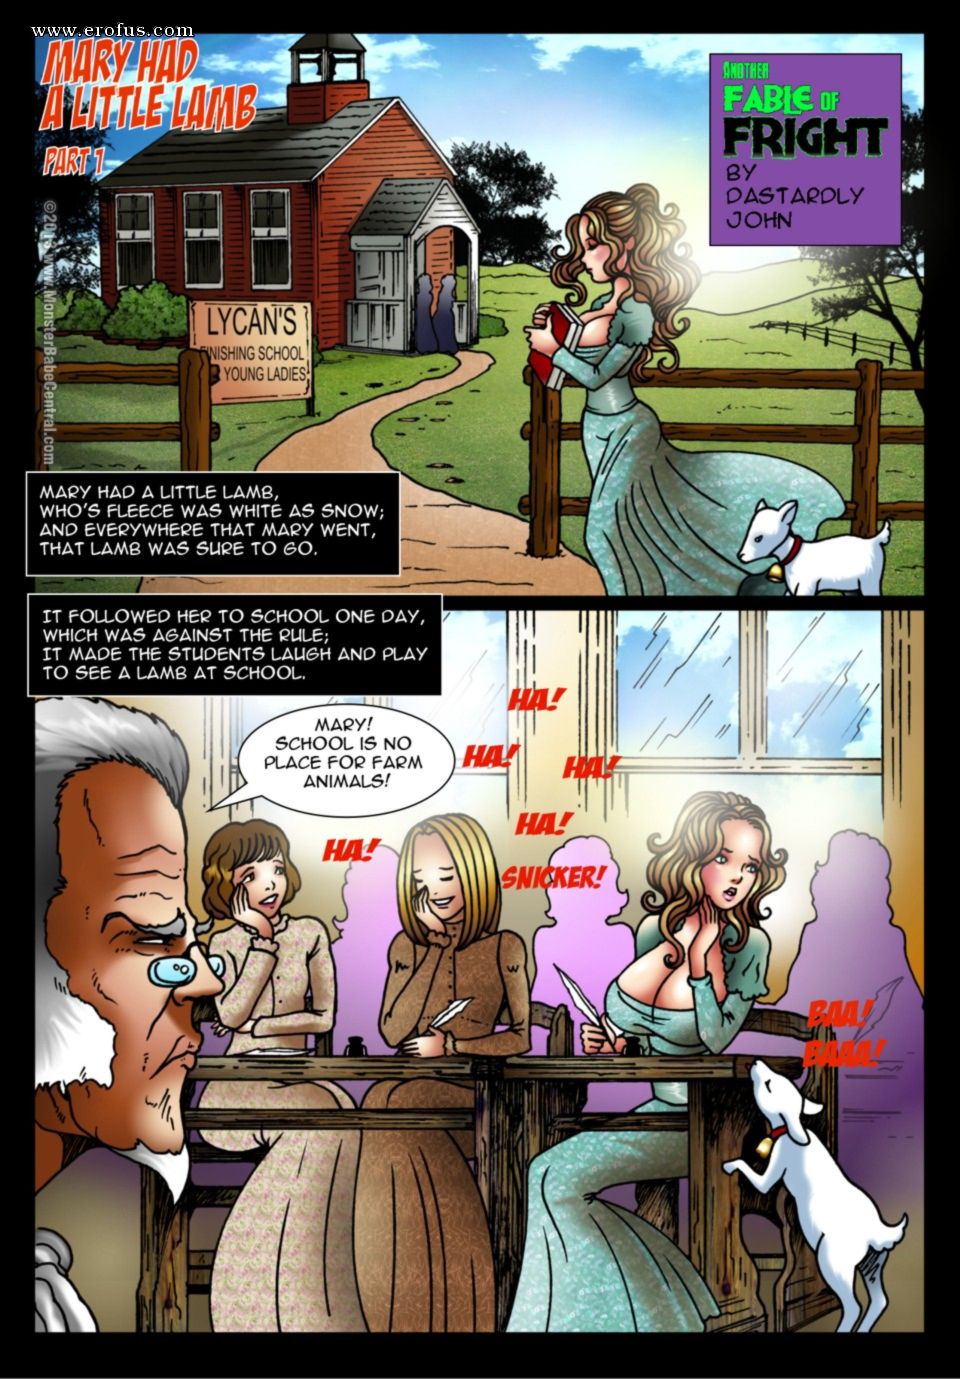 picture Fable of Fright_Page_212.jpg